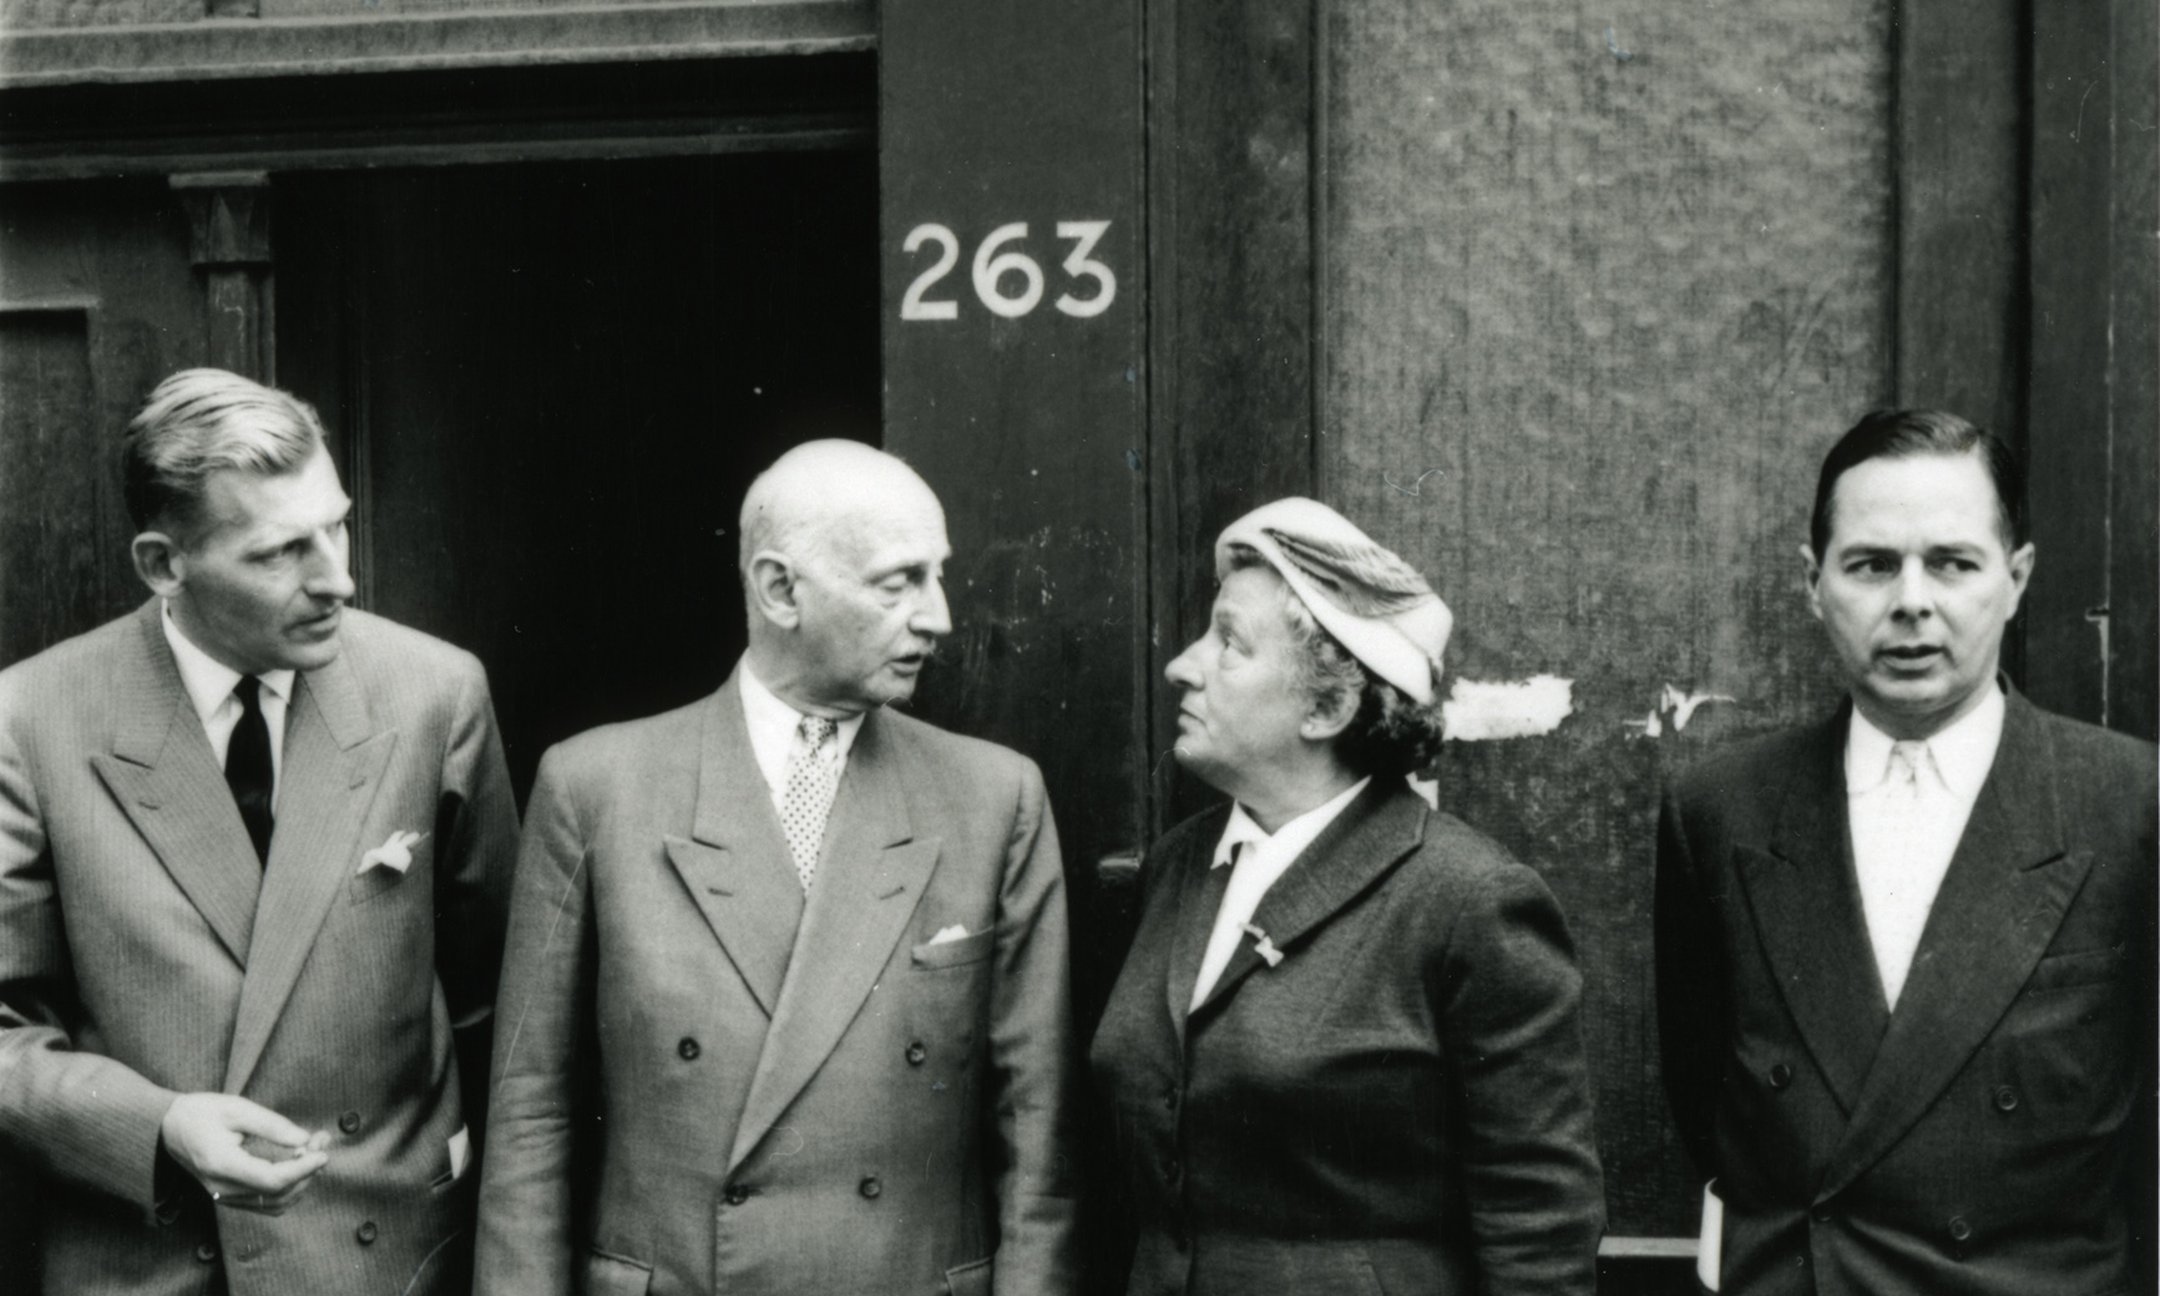 Otto Frank with three members of the first board of the Anne Frank Stichting in 1957. From left to right: Floris Bakels, Otto Frank, Truus Wijsmuller, and Herman Heldring